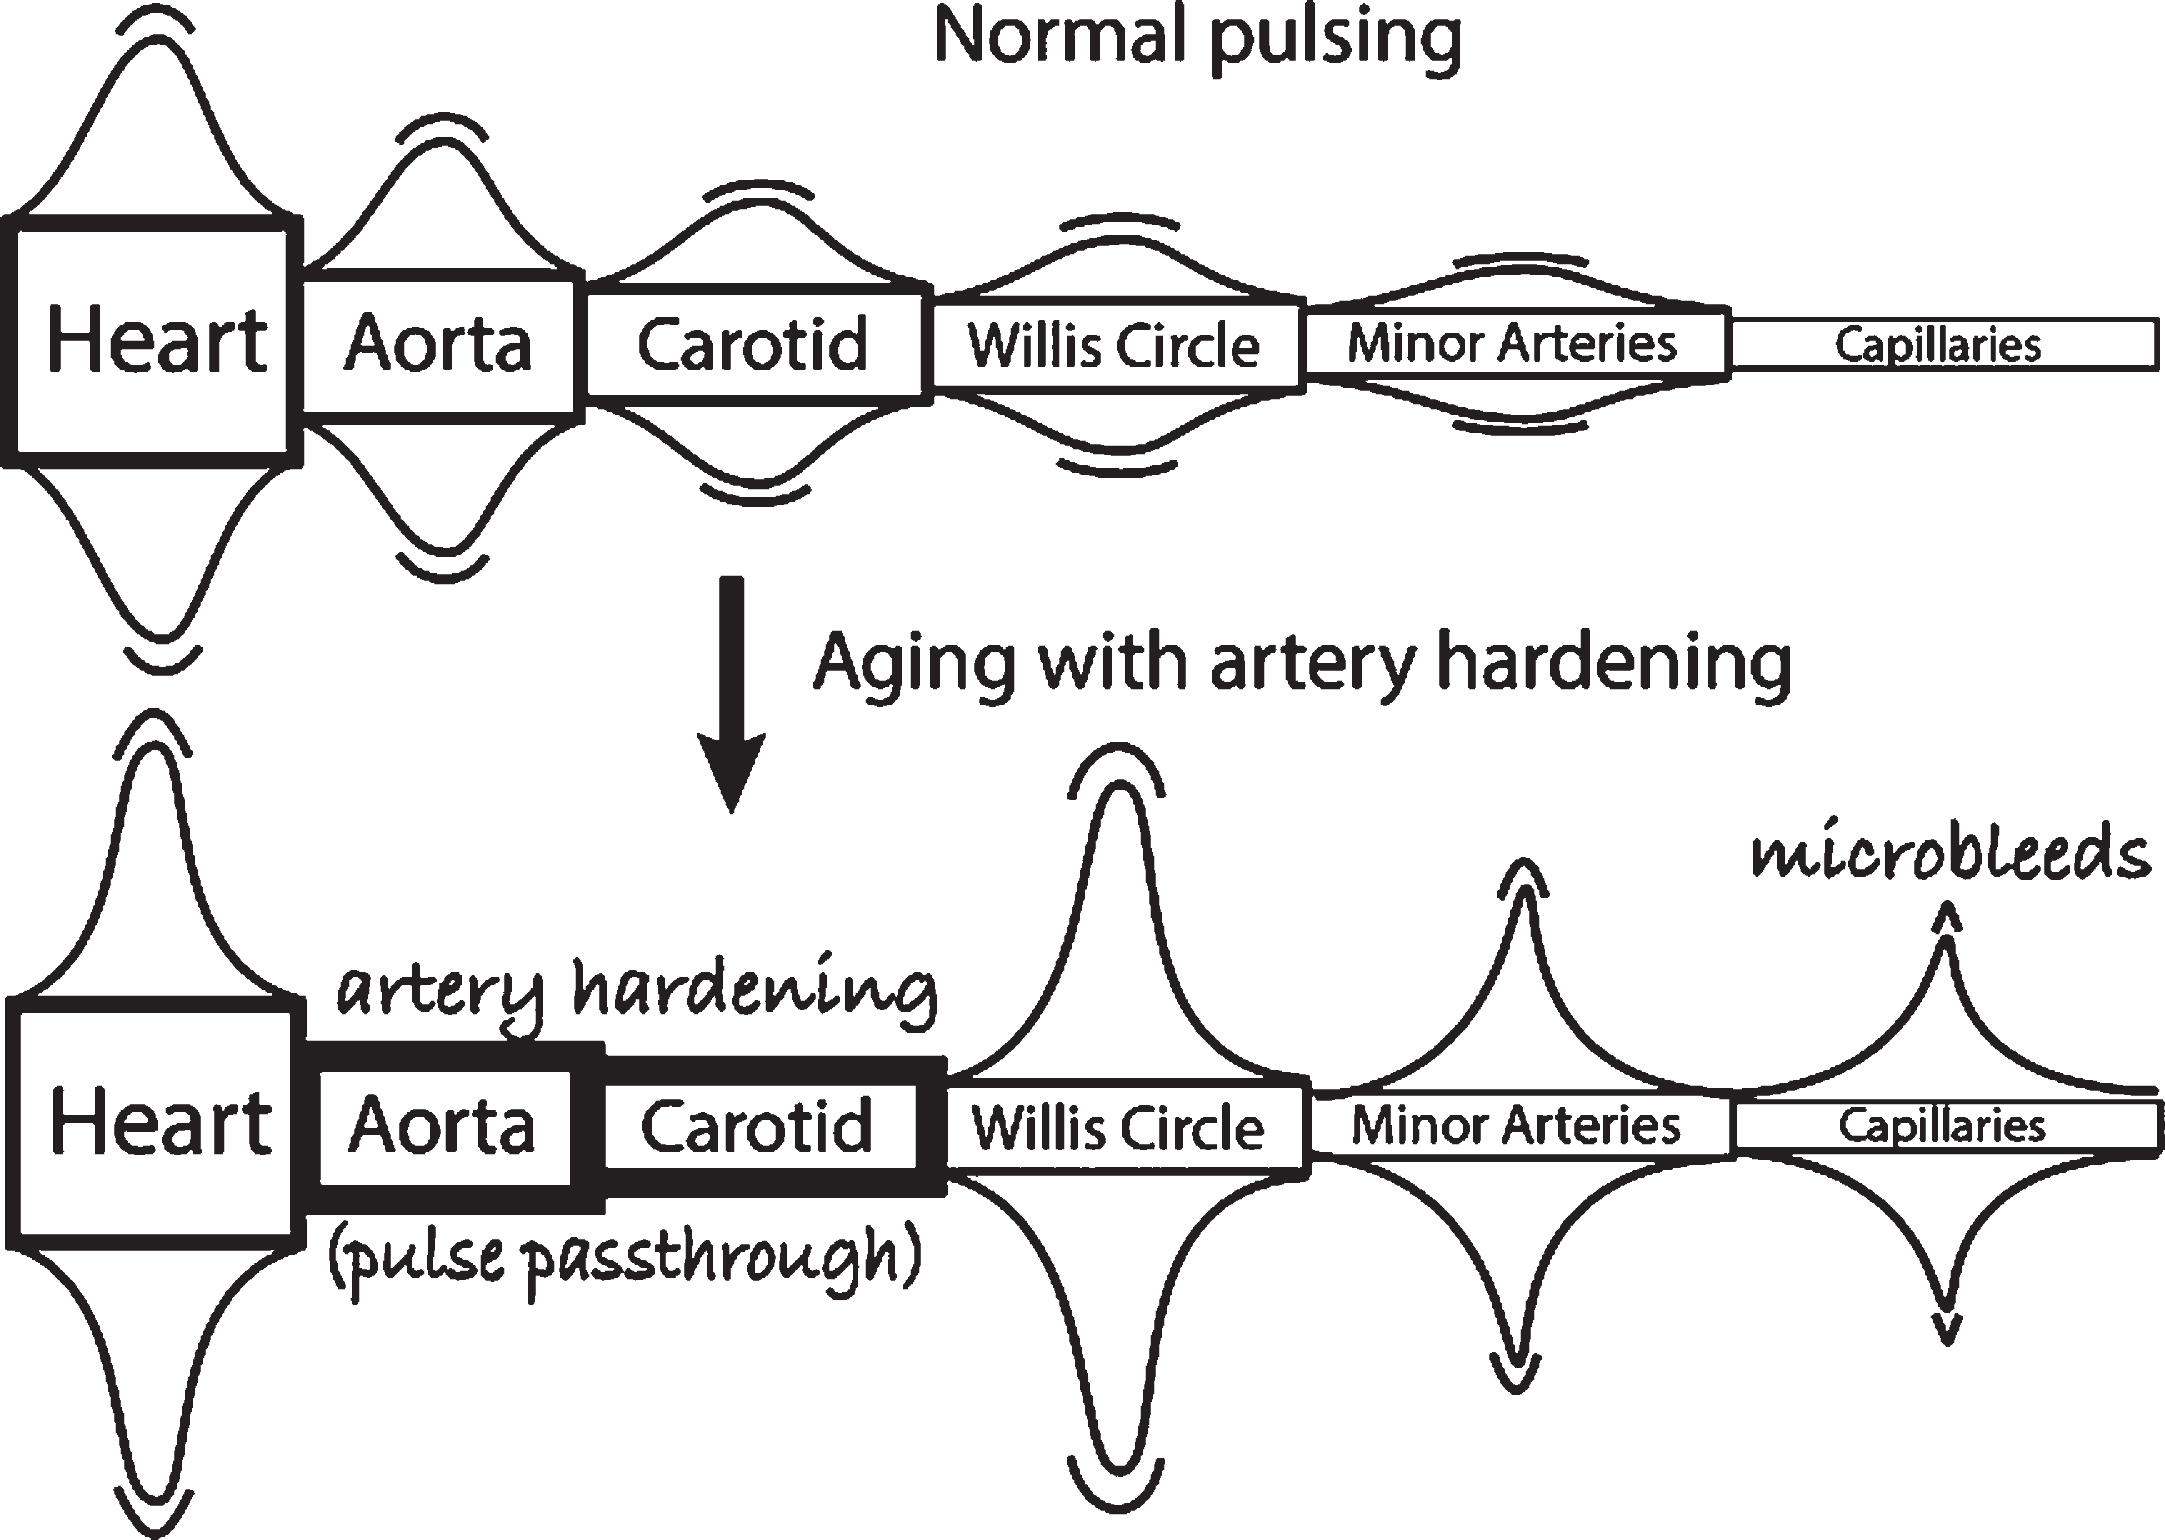 Vascular pulsing that is primarily responsible for CSF flow –the effects of aging and artery hardening. The aorta and carotid harden and lose their flexibility that is responsible for steady capillary flow (upper figure). But artery hardening causes intense heart pulses to pass through these two major arteries and increases the pulse intensity motion in the circle of Willis, the minor arteries, and capillaries, causing microbleeds [55]. Thus, the increased pulse intensity in the circle of Willis with age should be responsible for increased chaotic CSF flow in the neighborhood of the circle of Willis, namely in the basal cistern and its direct CSF connections. This increased motion could lead to higher energy Aβ and tau molecular states that are precursors to neurotoxic seeds, thus possibly initiating Aβ seeds leading to AD.